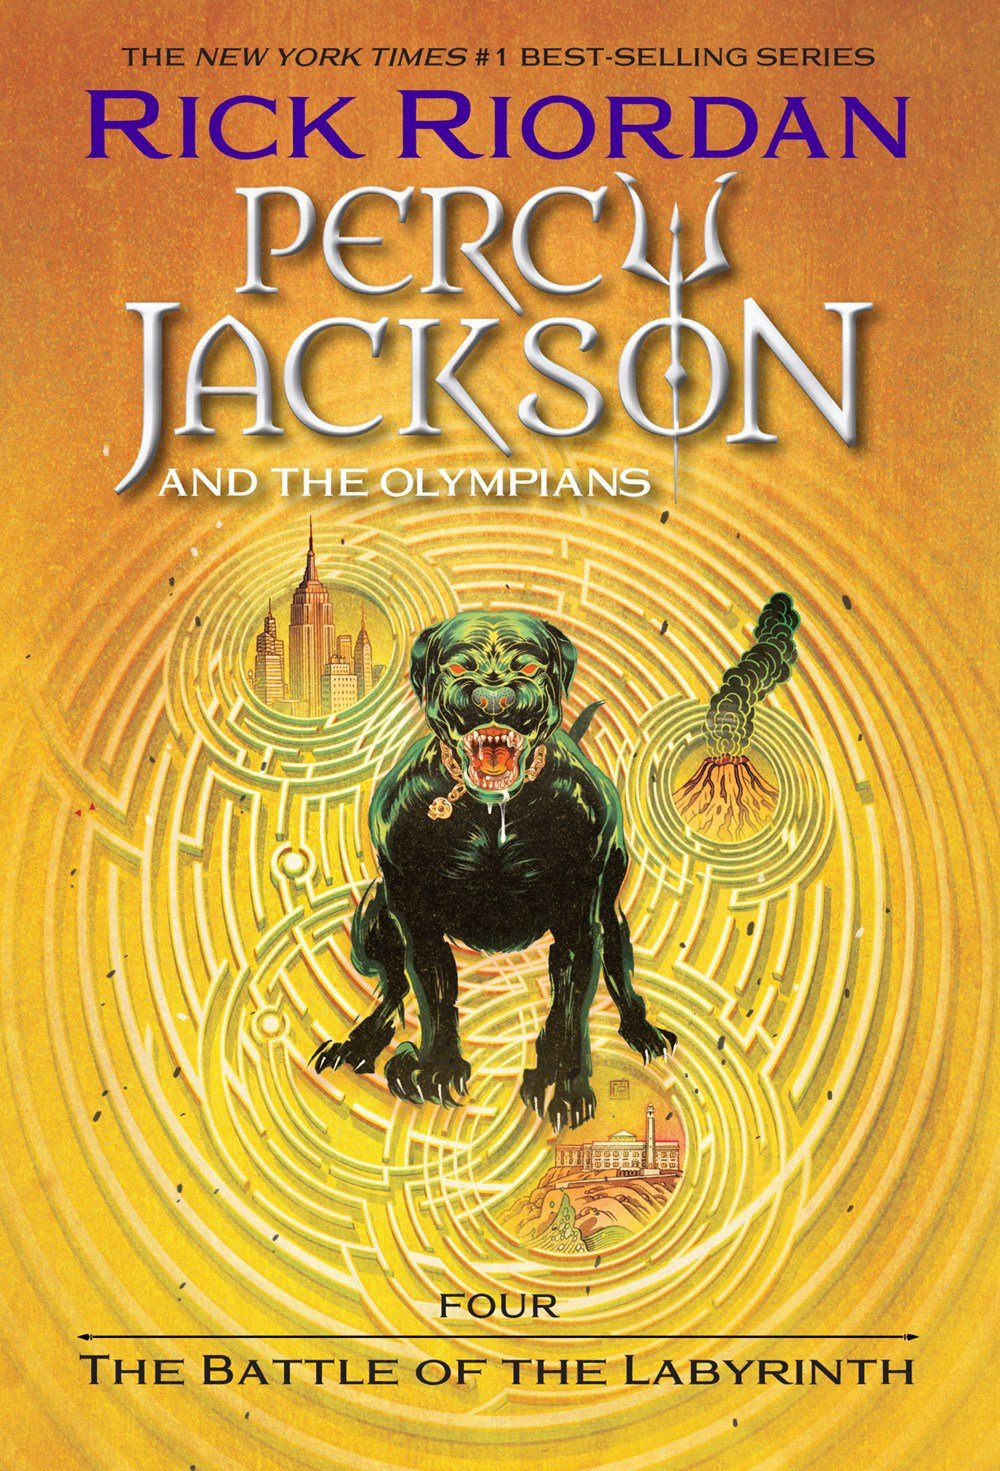 10 Monsters From The 'Percy Jackson' Books That Could Show Up In The  Disney+ Series